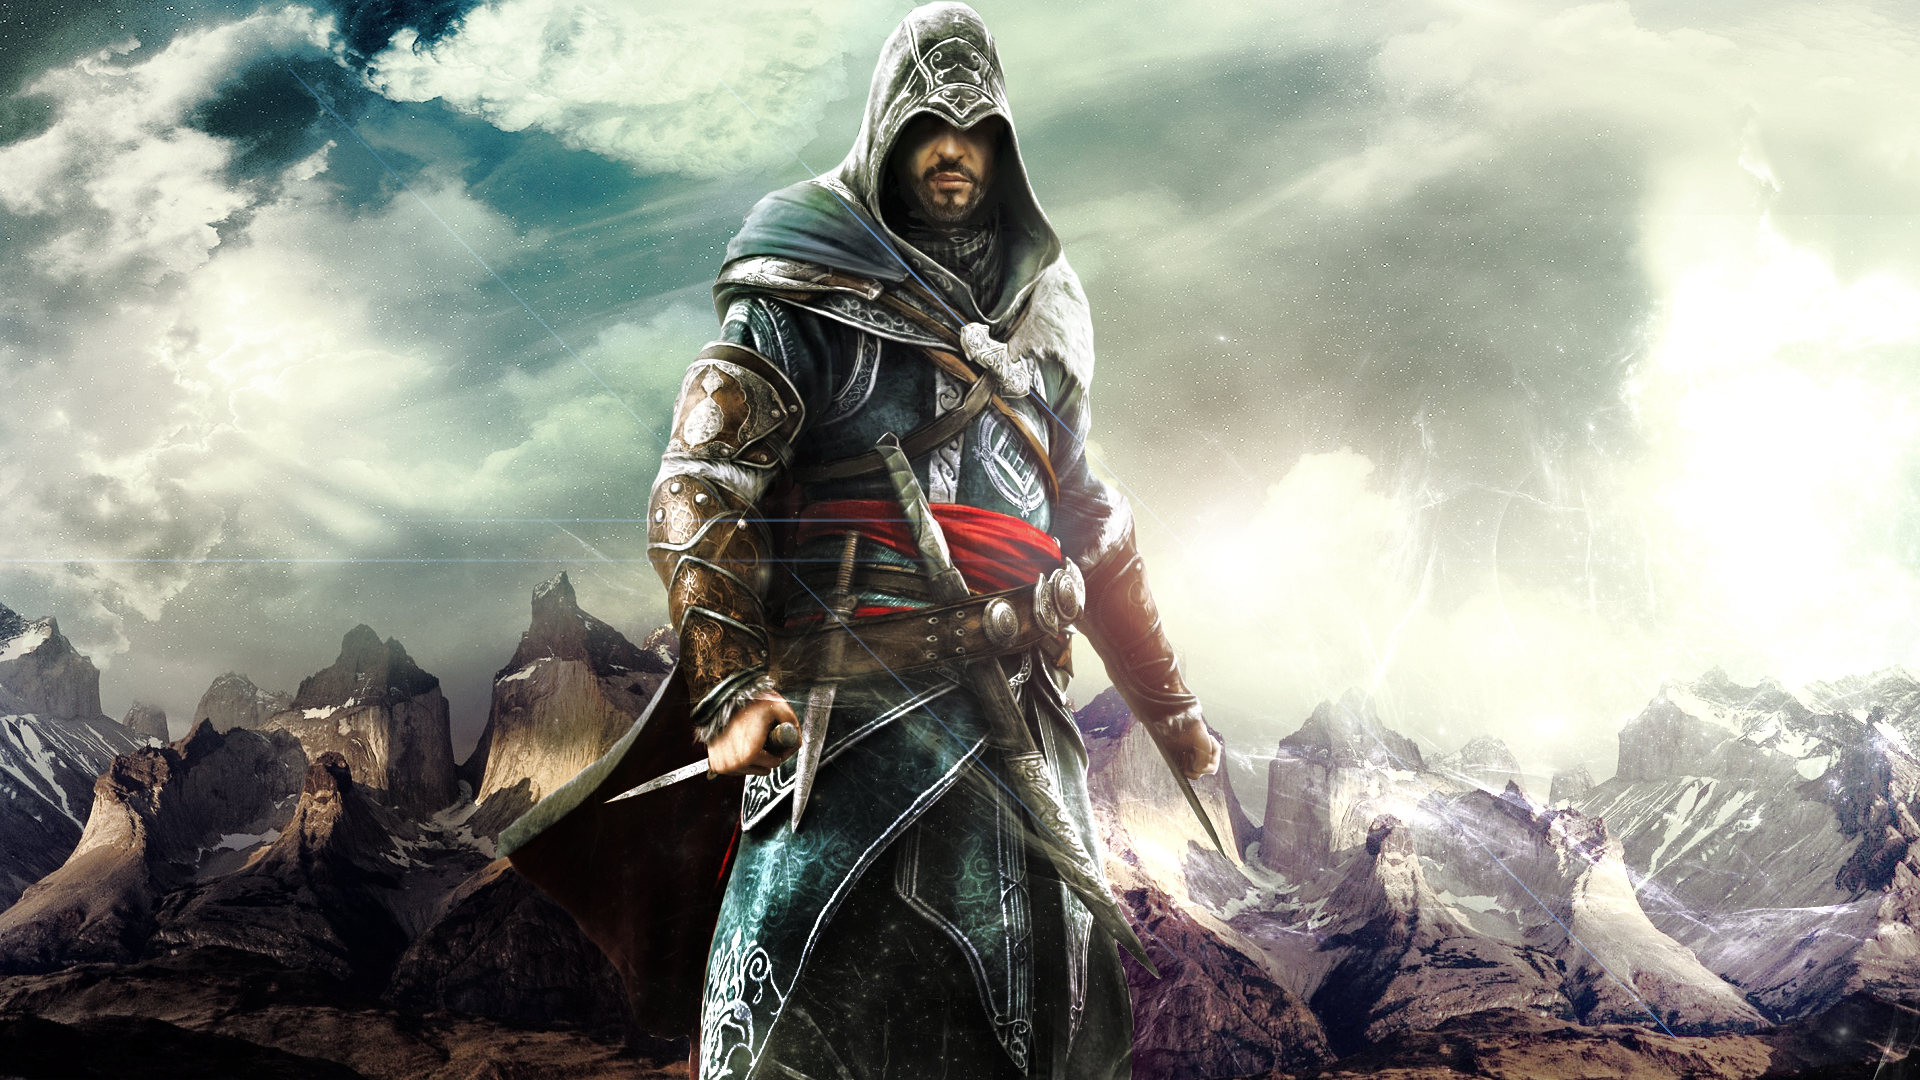 Assassins Creed Revelations Wallpaper High Definition High Quality